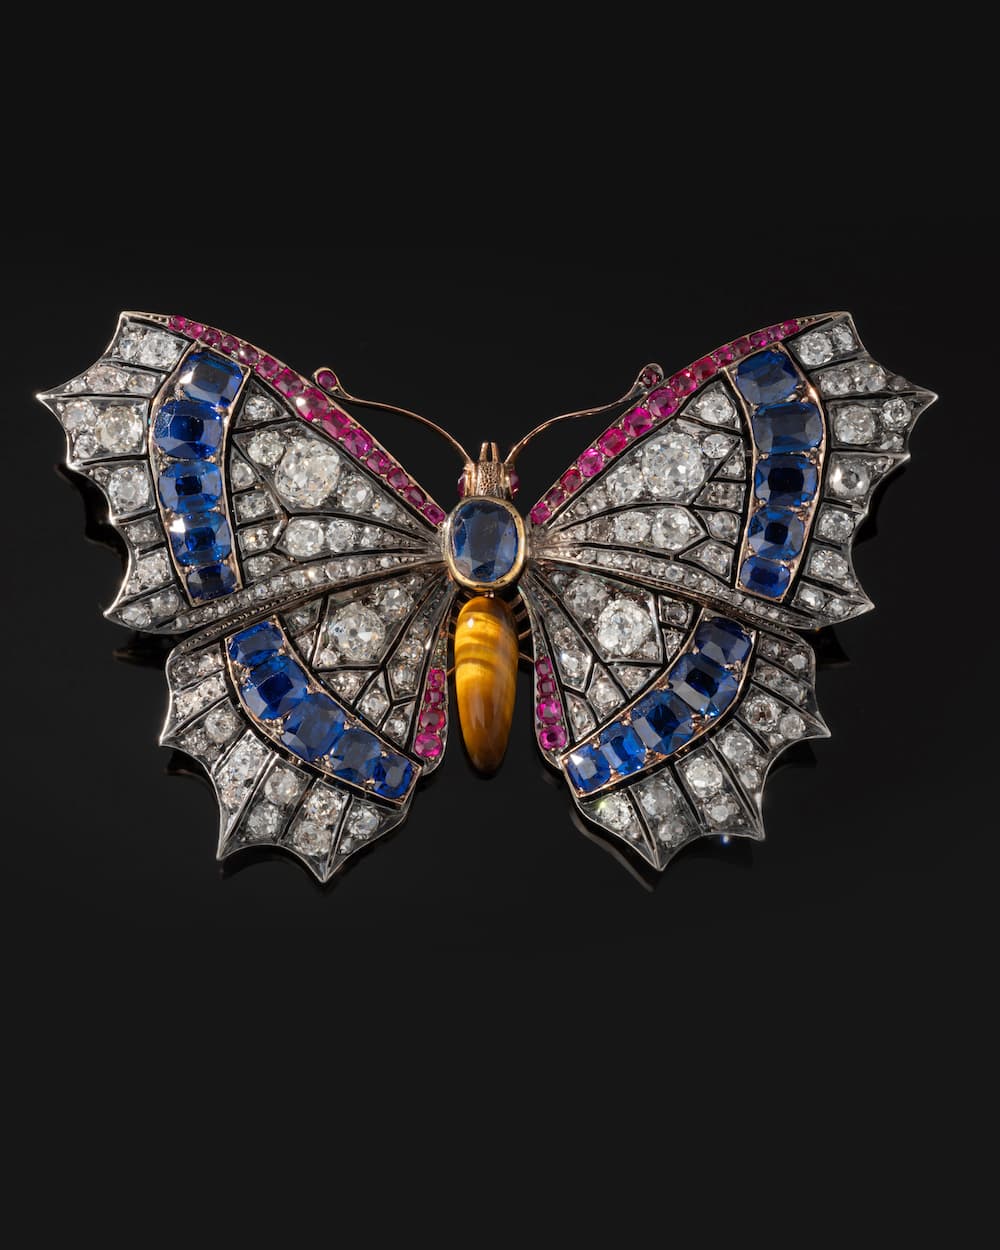 Important trembling Butterfly broche, set with rubies, sapphires and diamonds, 19th century